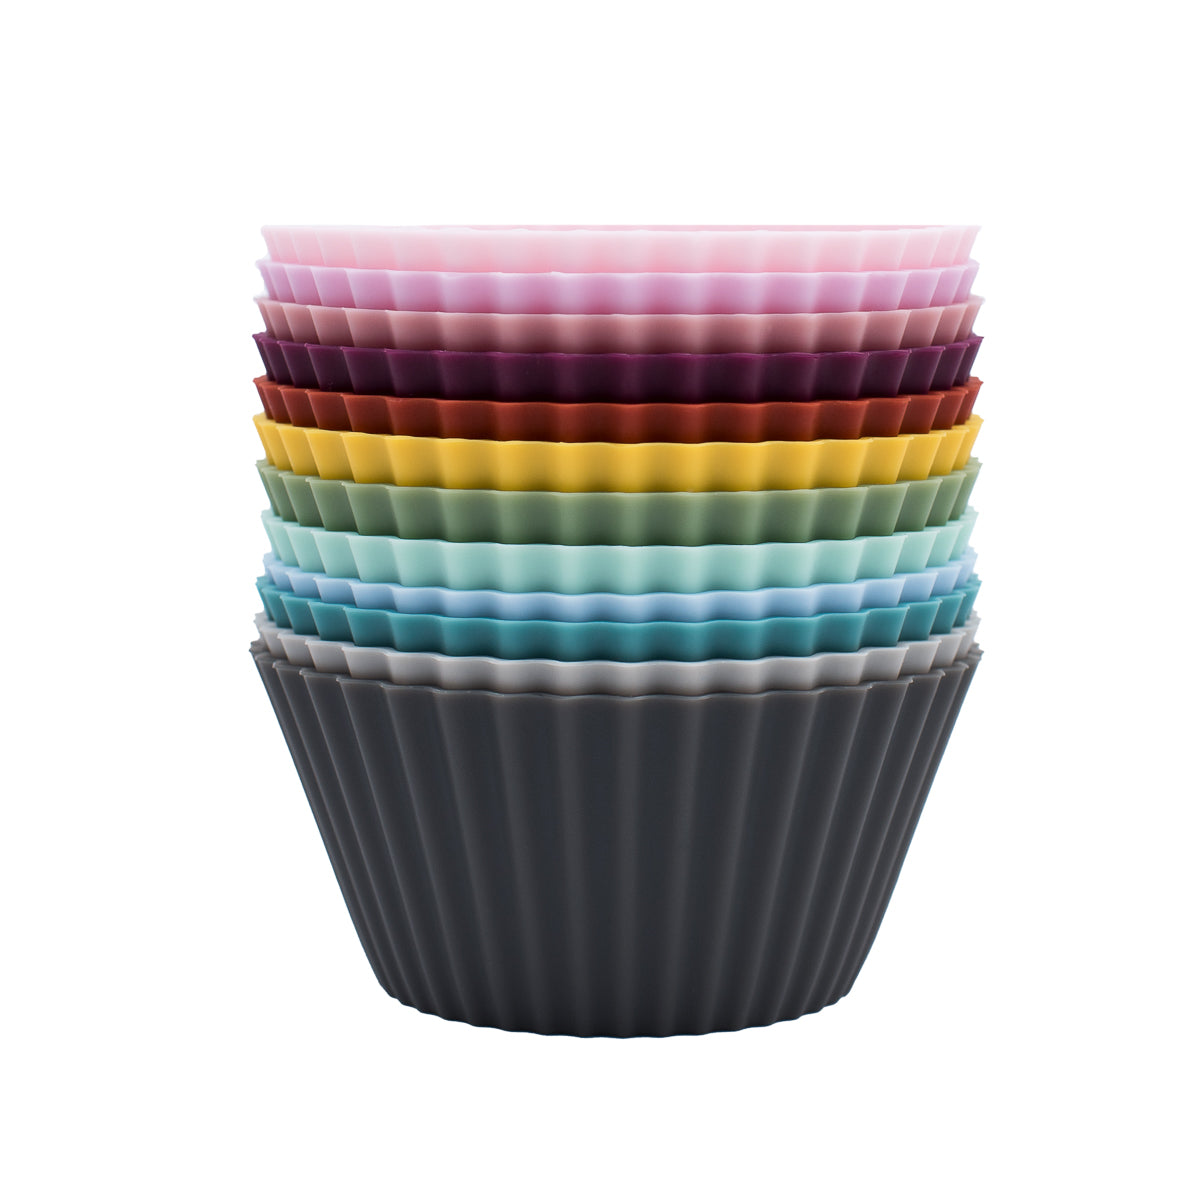 Silicone Muffin Cups - Set Of 12 - Little Reef and Friends